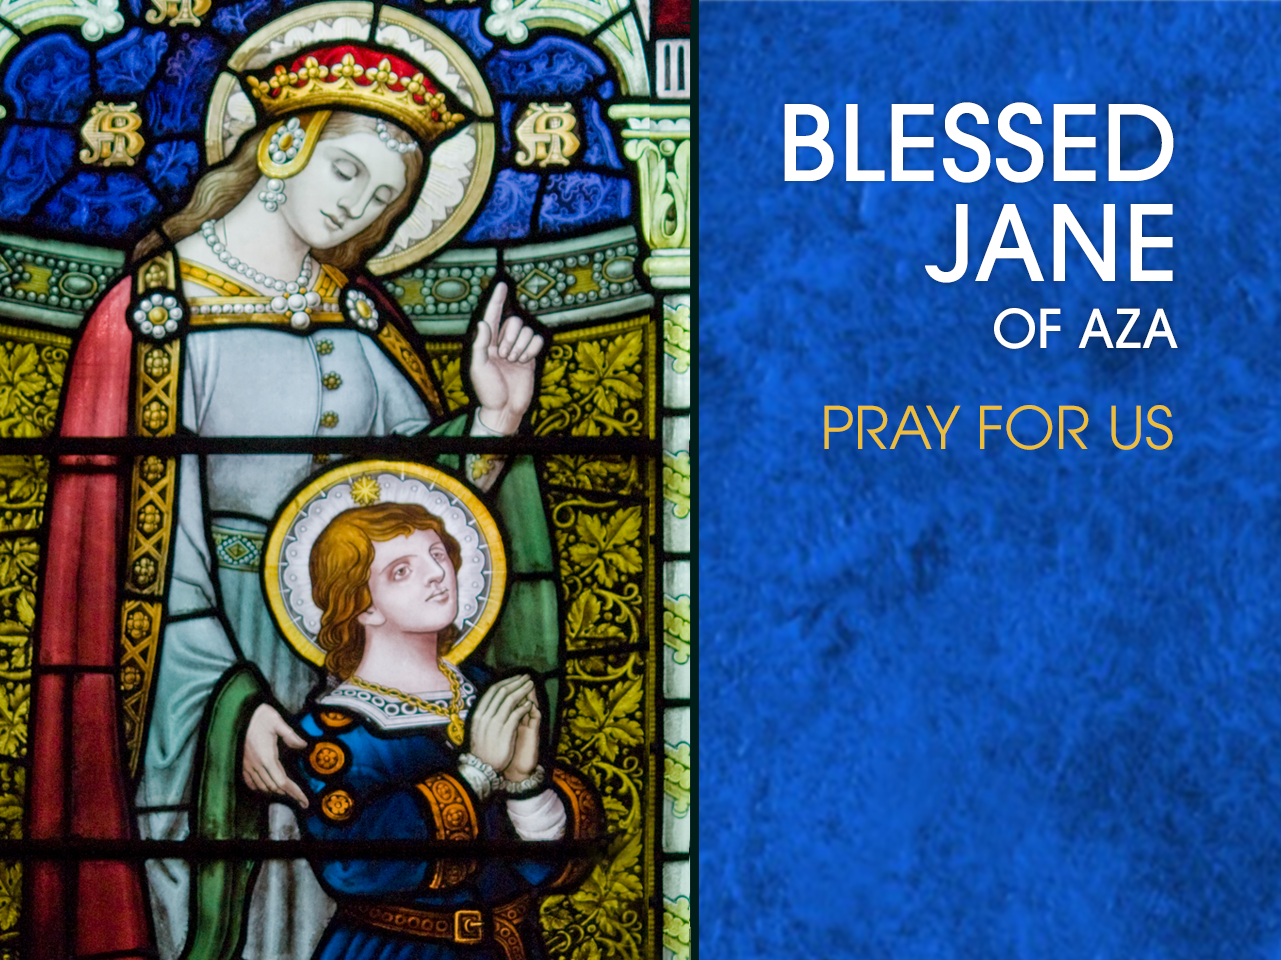 Blessed Jane of Aza